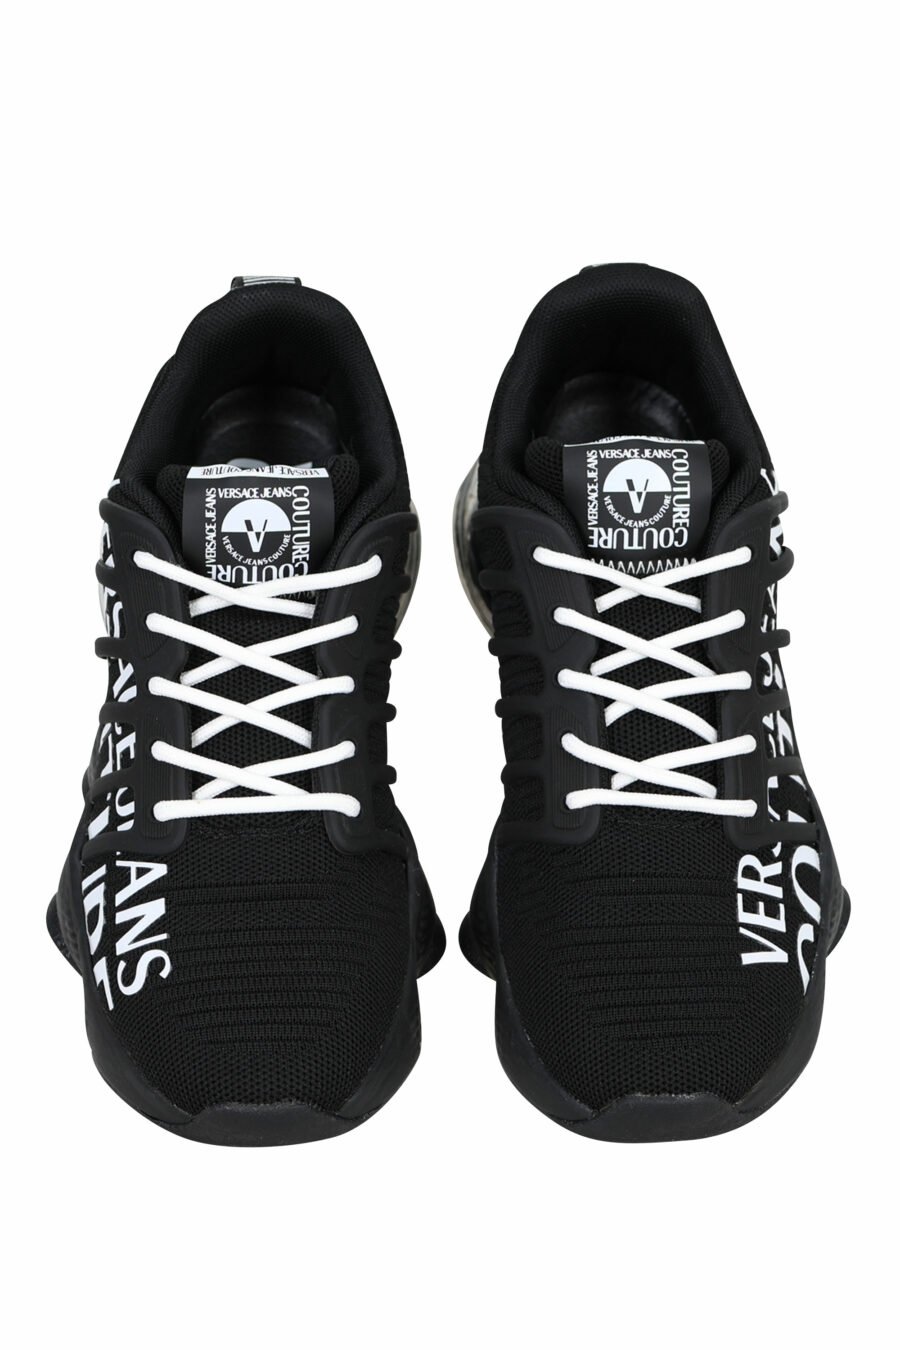 Black trainers with vertical maxilogo and crossed laces - 8052019484915 4